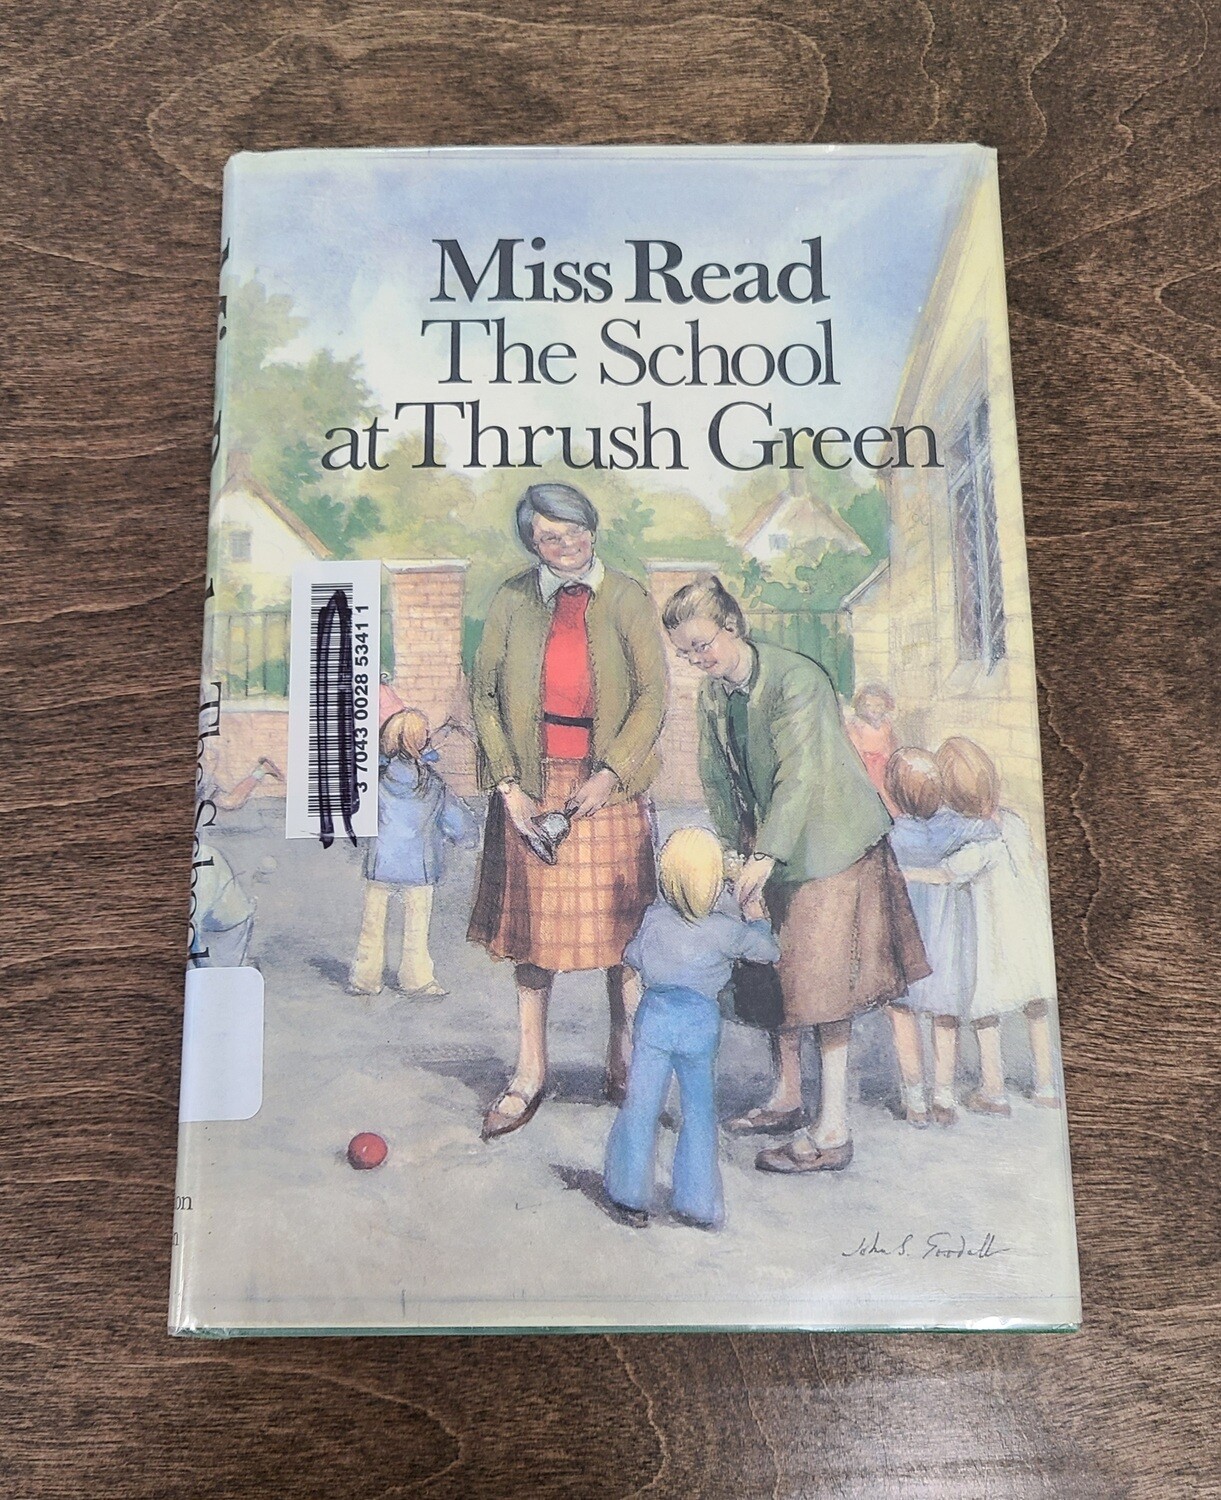 The School at Thrush Green by Miss Read